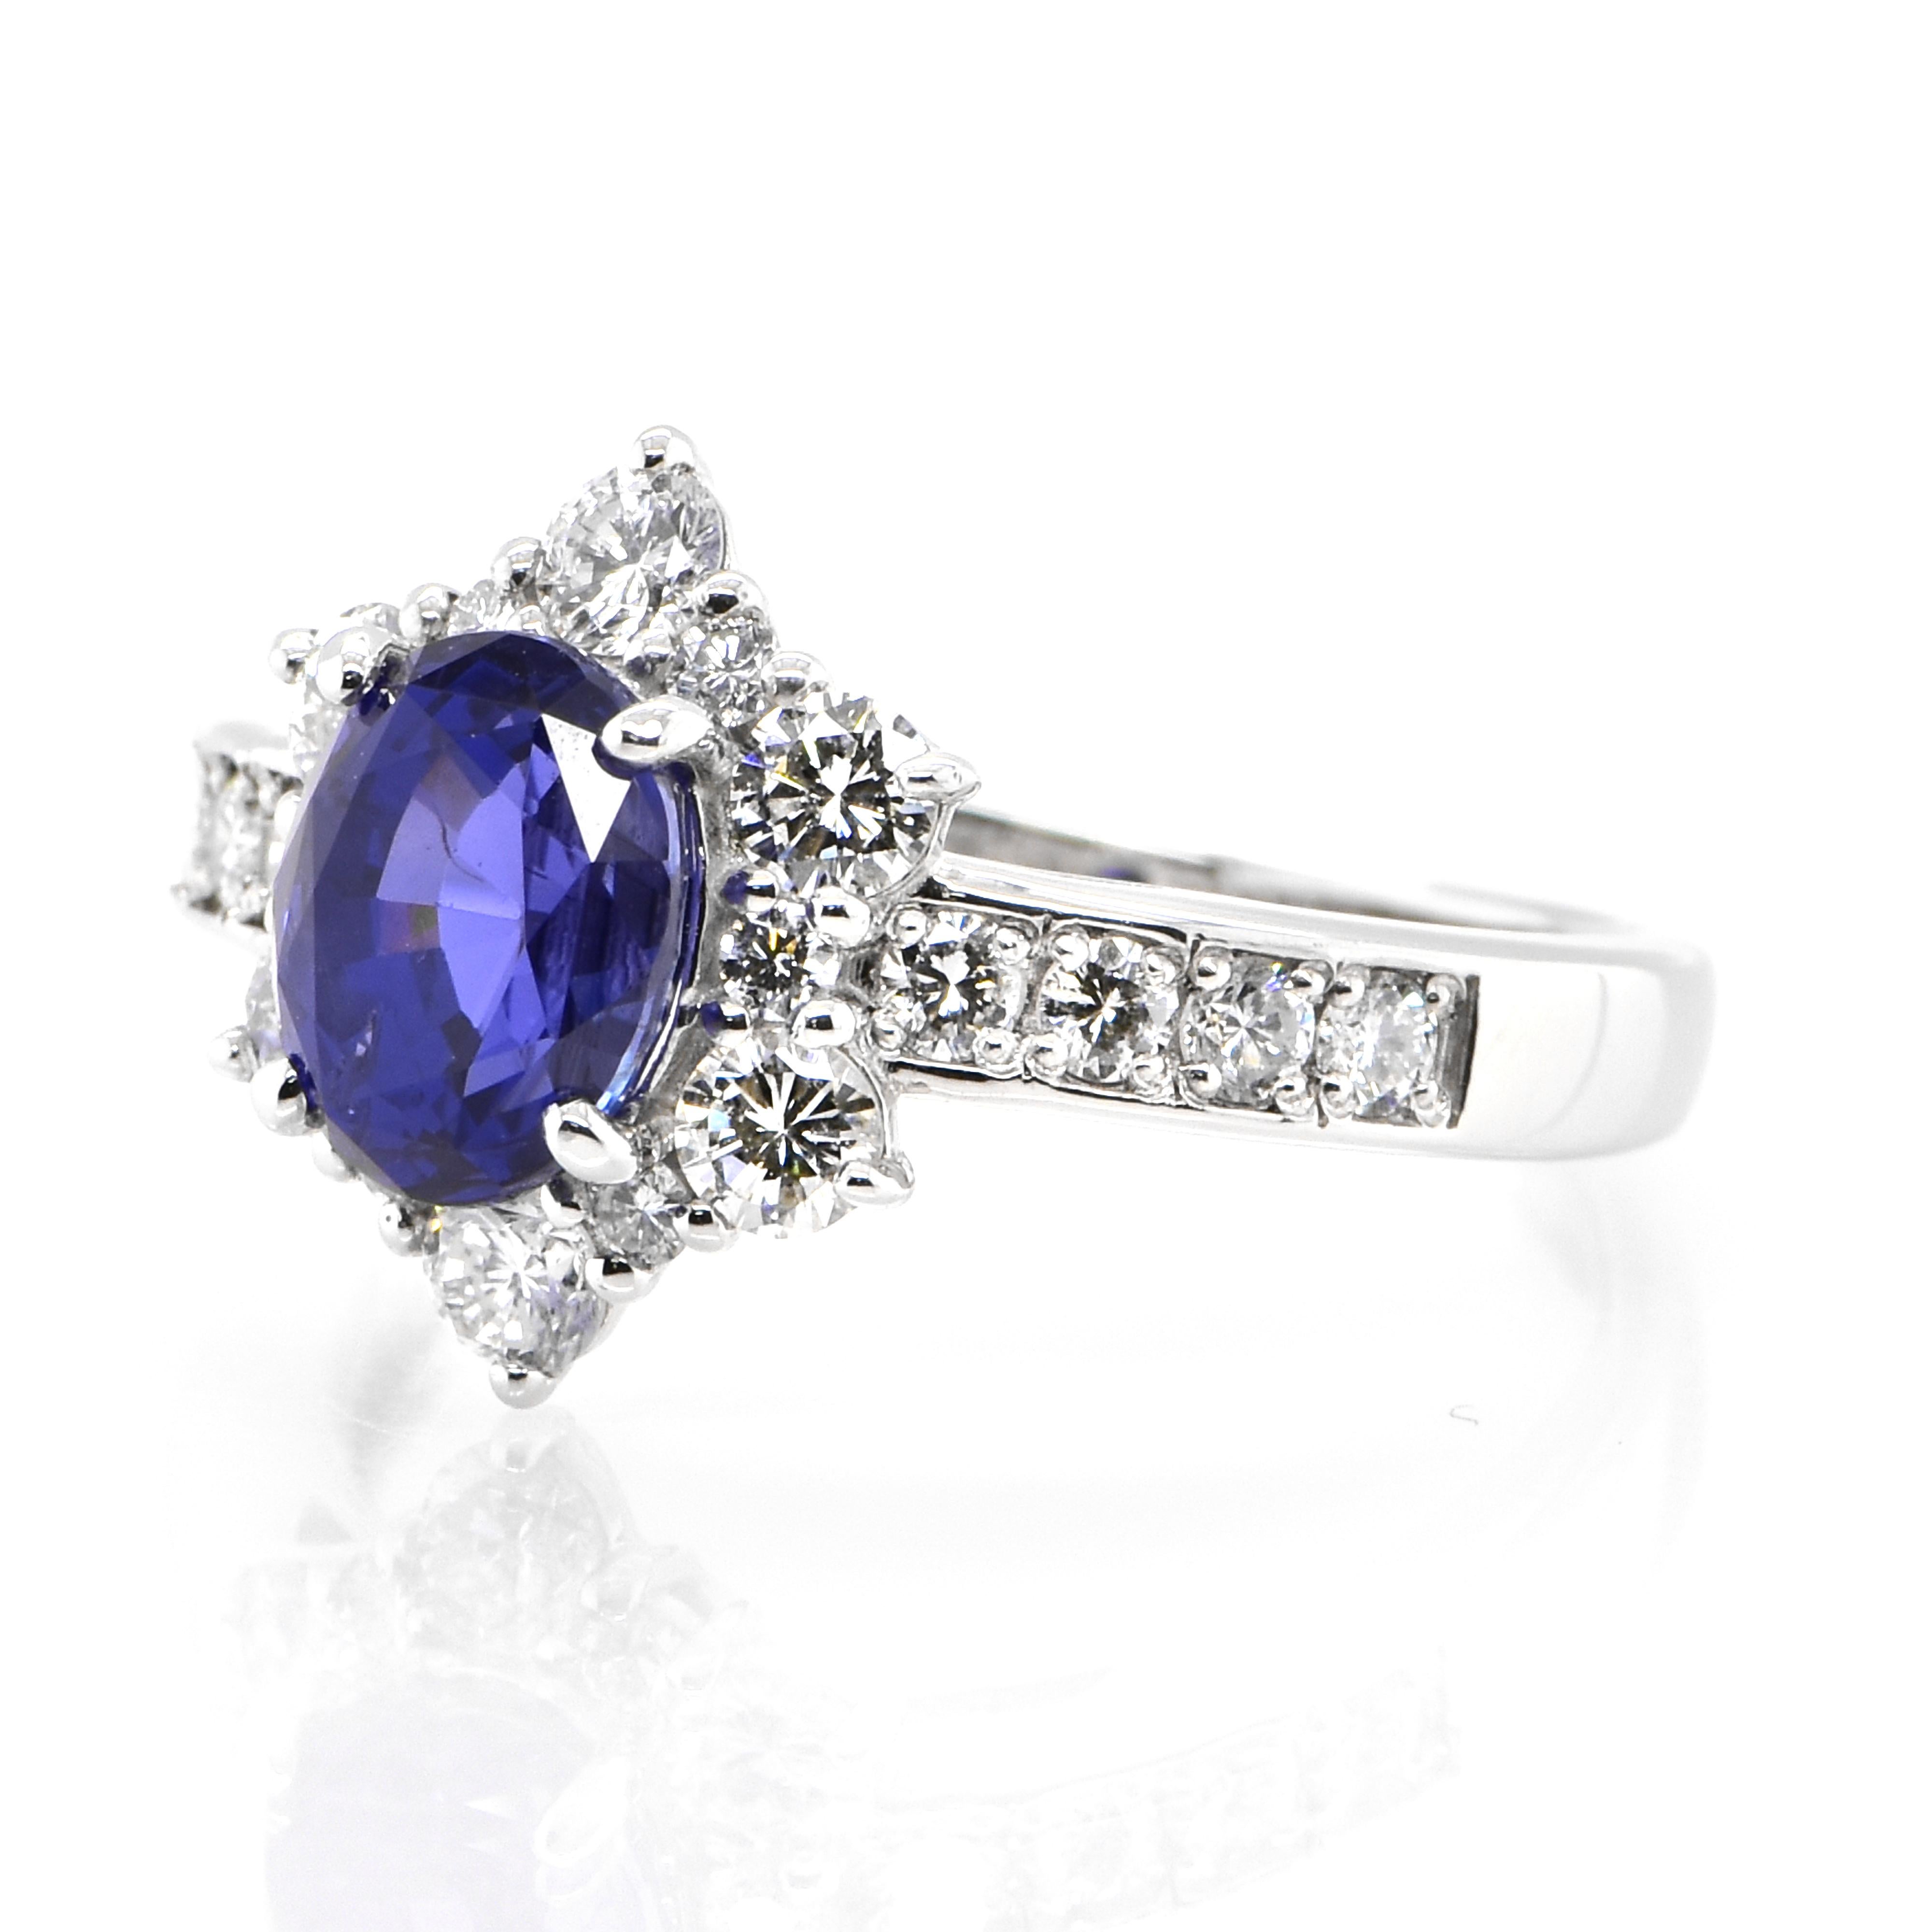 Oval Cut GIA Certified 2.02 Carat, Color-Change Sapphire and Diamond Ring set in Platinum For Sale